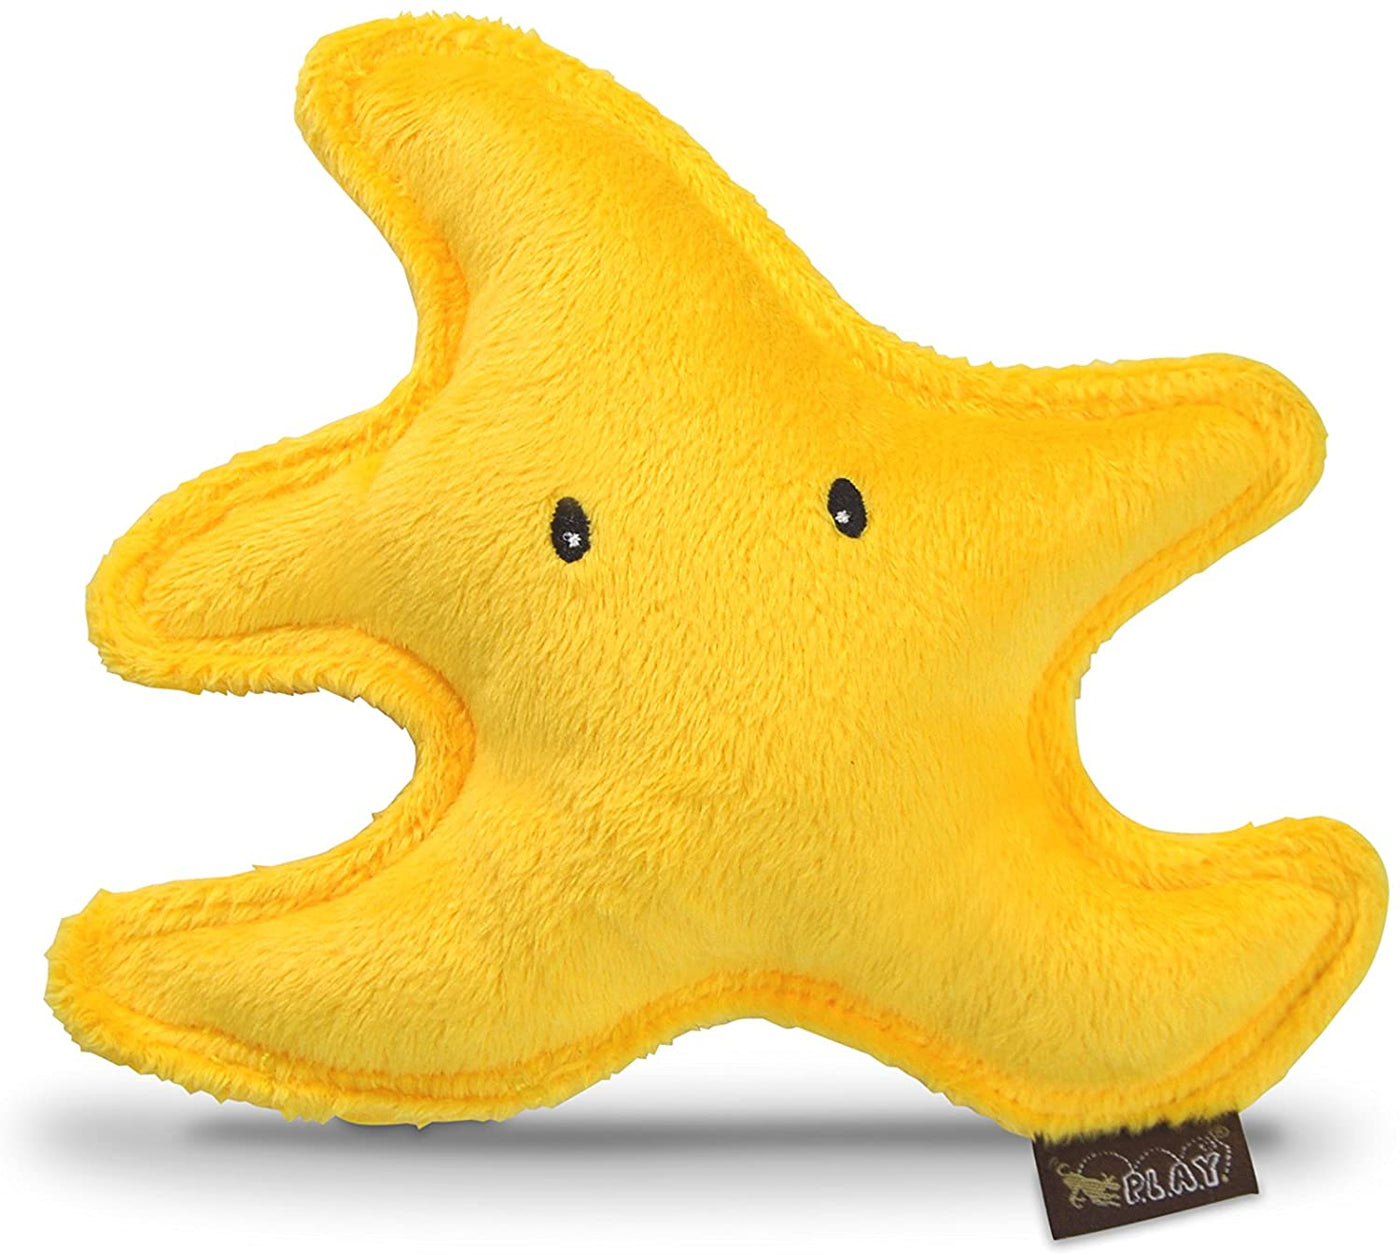 P.L.A.Y. - Under the Sea Toy - Starfish